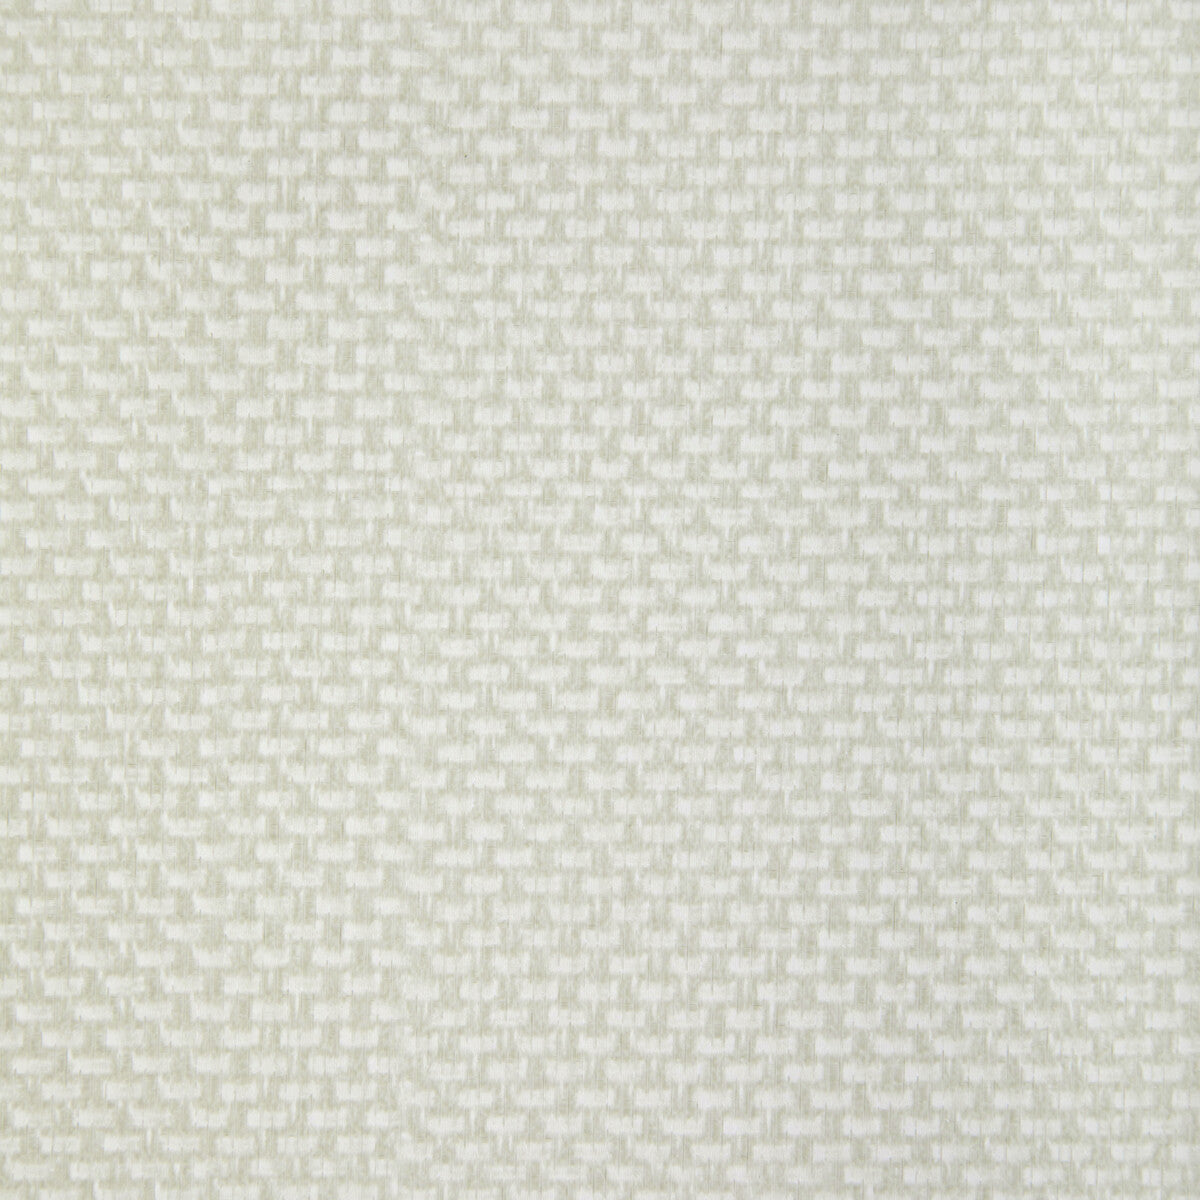 Stein fabric in birch color - pattern STEIN.1.0 - by Kravet Contract